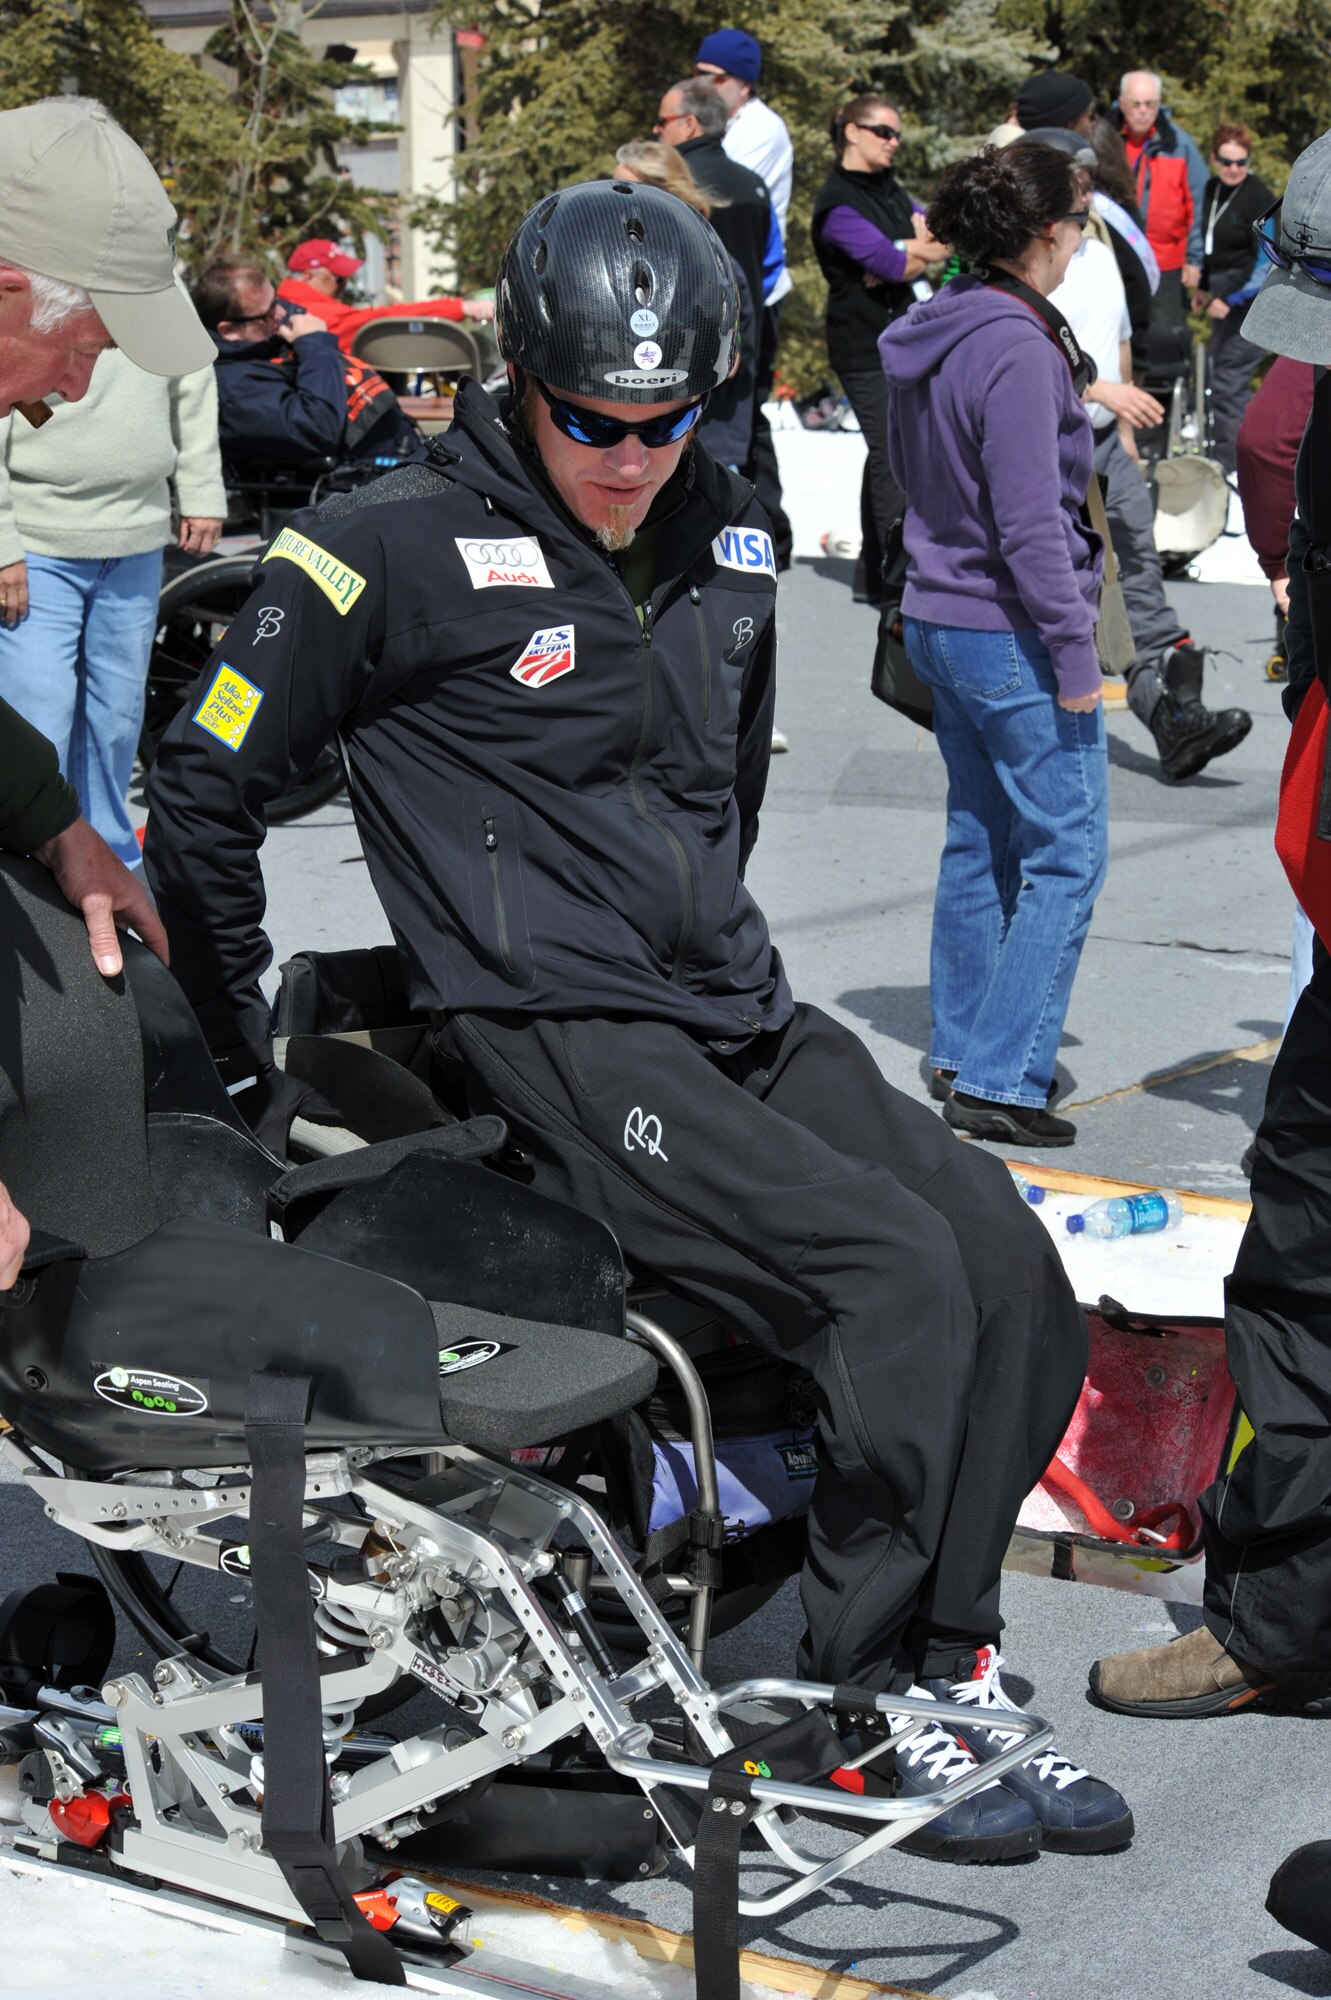 Sean Halsted lifts himself out of his wheelchair into a mono-ski outside The Silvertree Hotel March 30 for the 24th National Disabled American Veterans Winter Sports Clinic in Snowmass Village, Colo. Halsted is an Air Force veteran who will be competing in the 2014 Sochi Paralympic Winter Games. (U.S. Air Force photo/Desiree N. Palacios)
